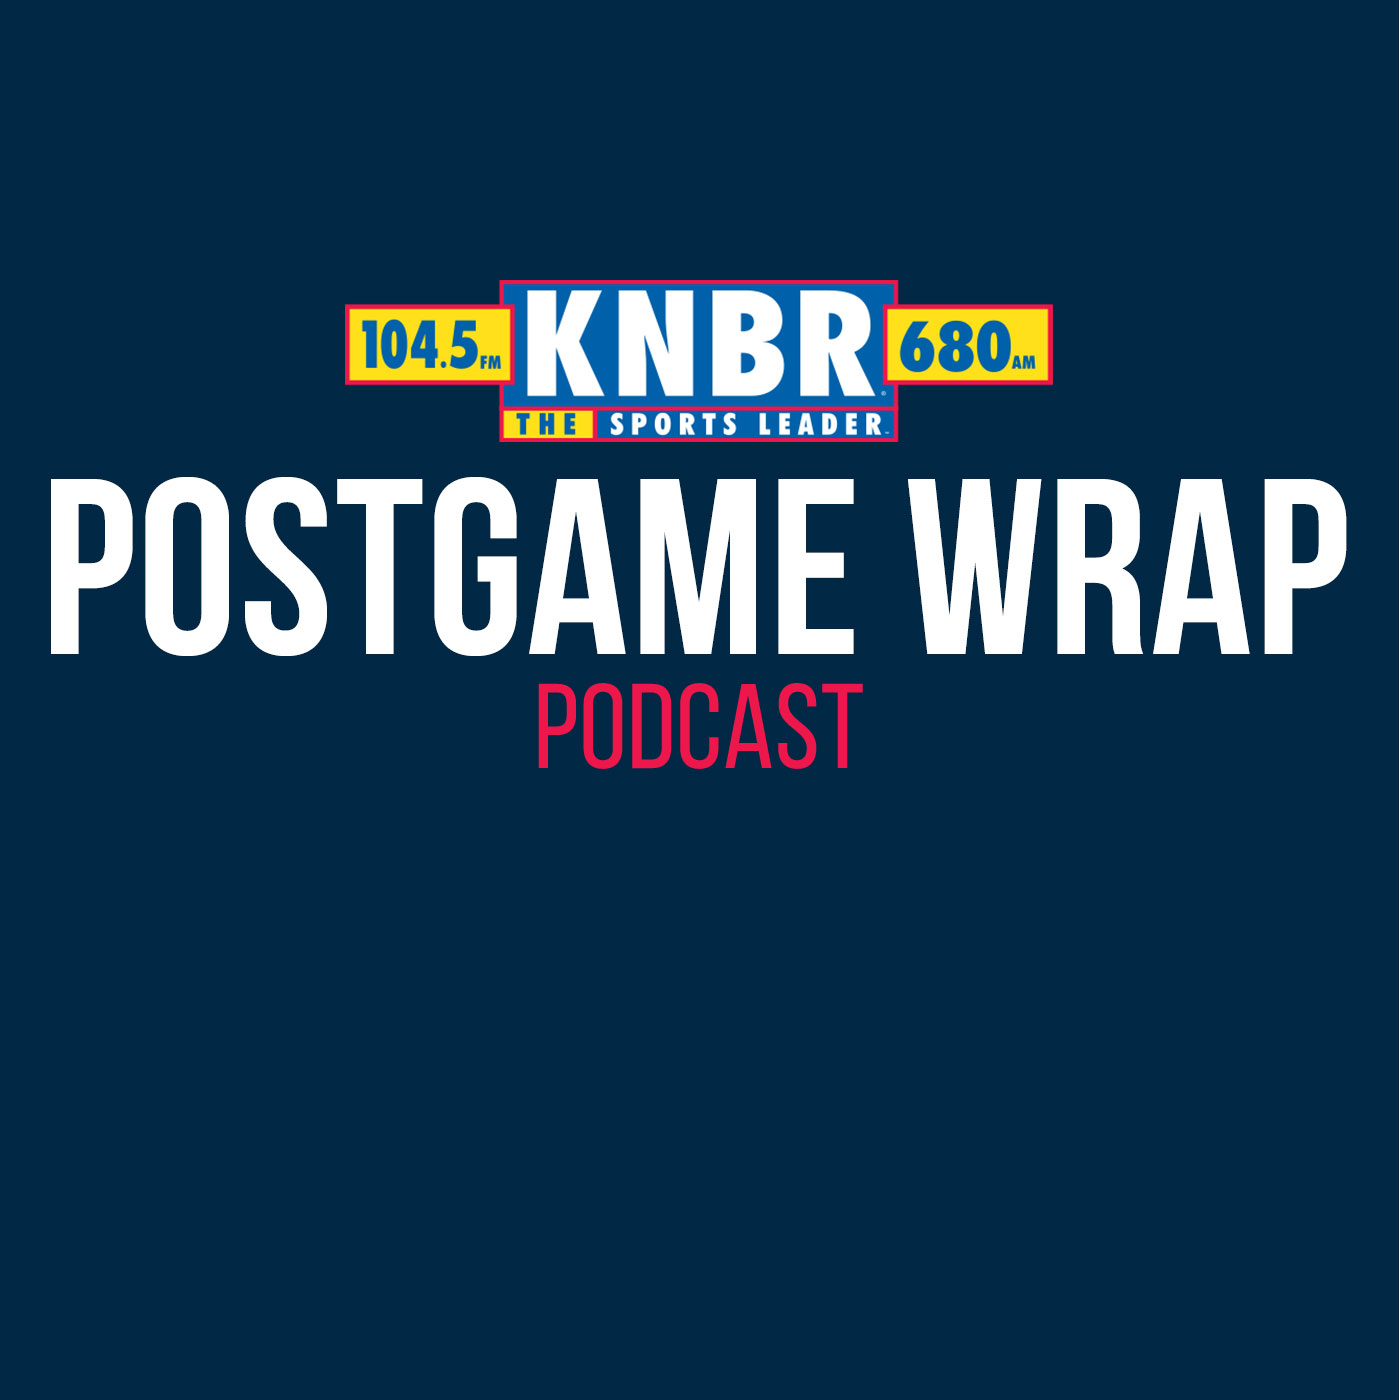 8-6 Postgame Wrap: A's 8, Giants 6